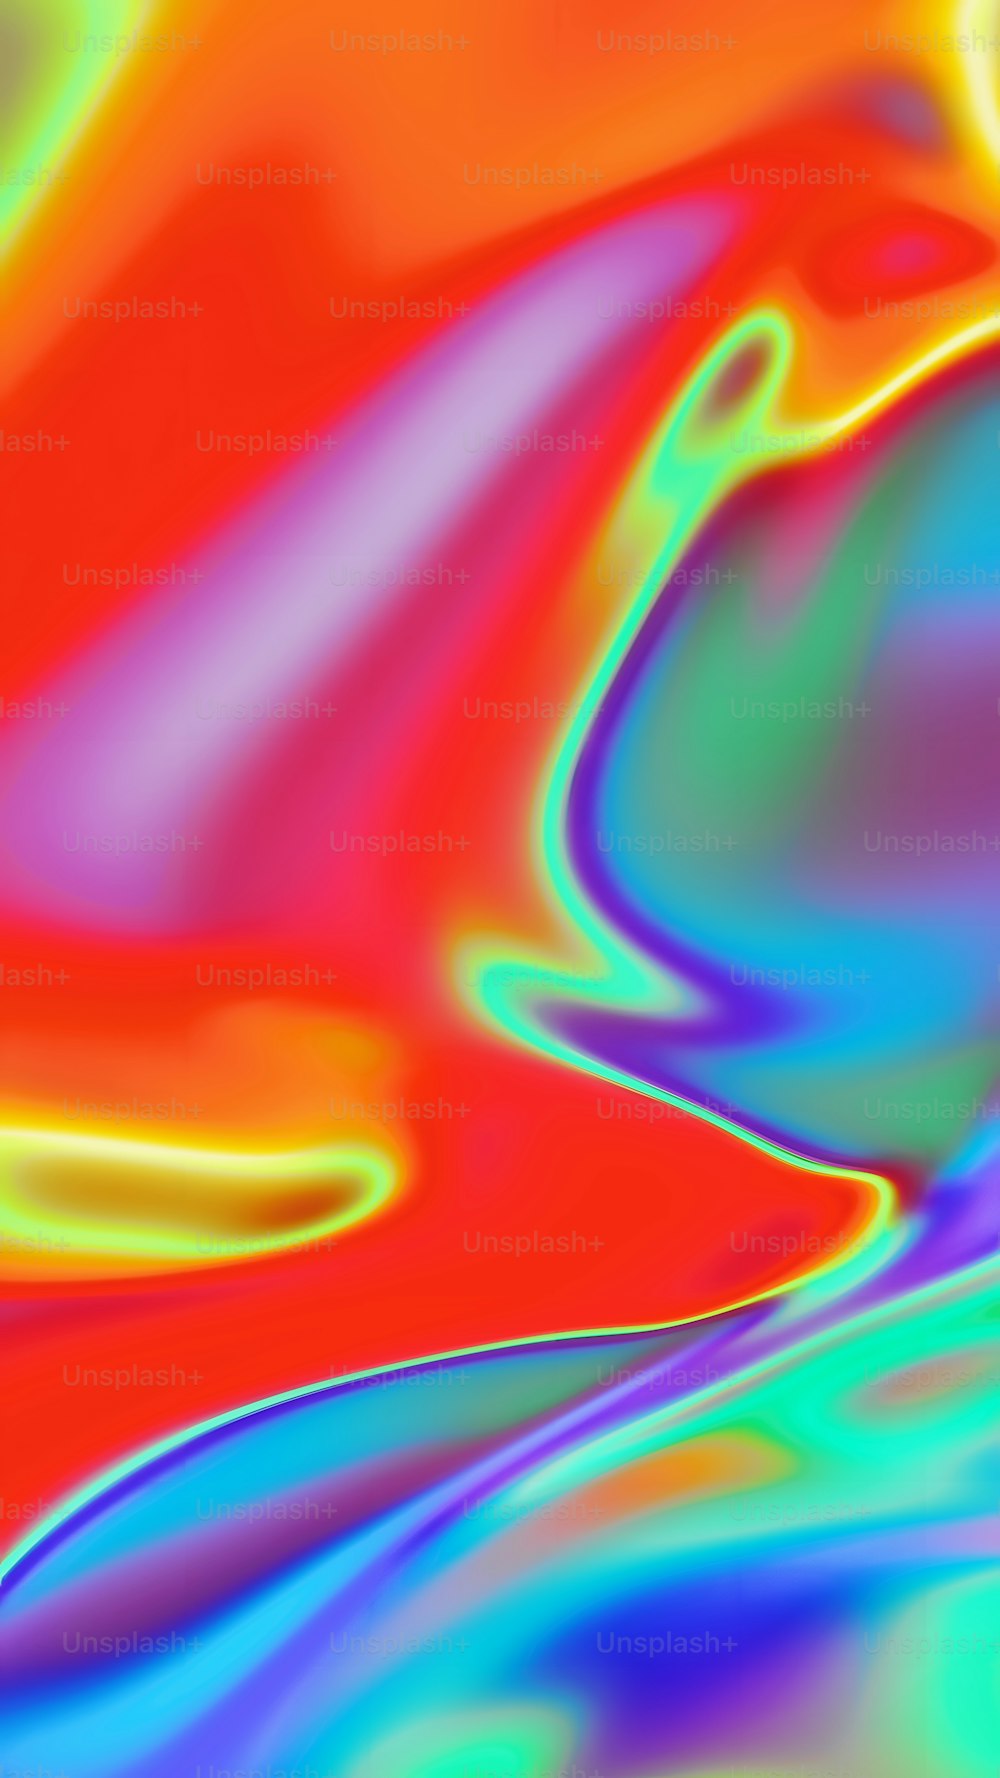 a multicolored image of a liquid substance